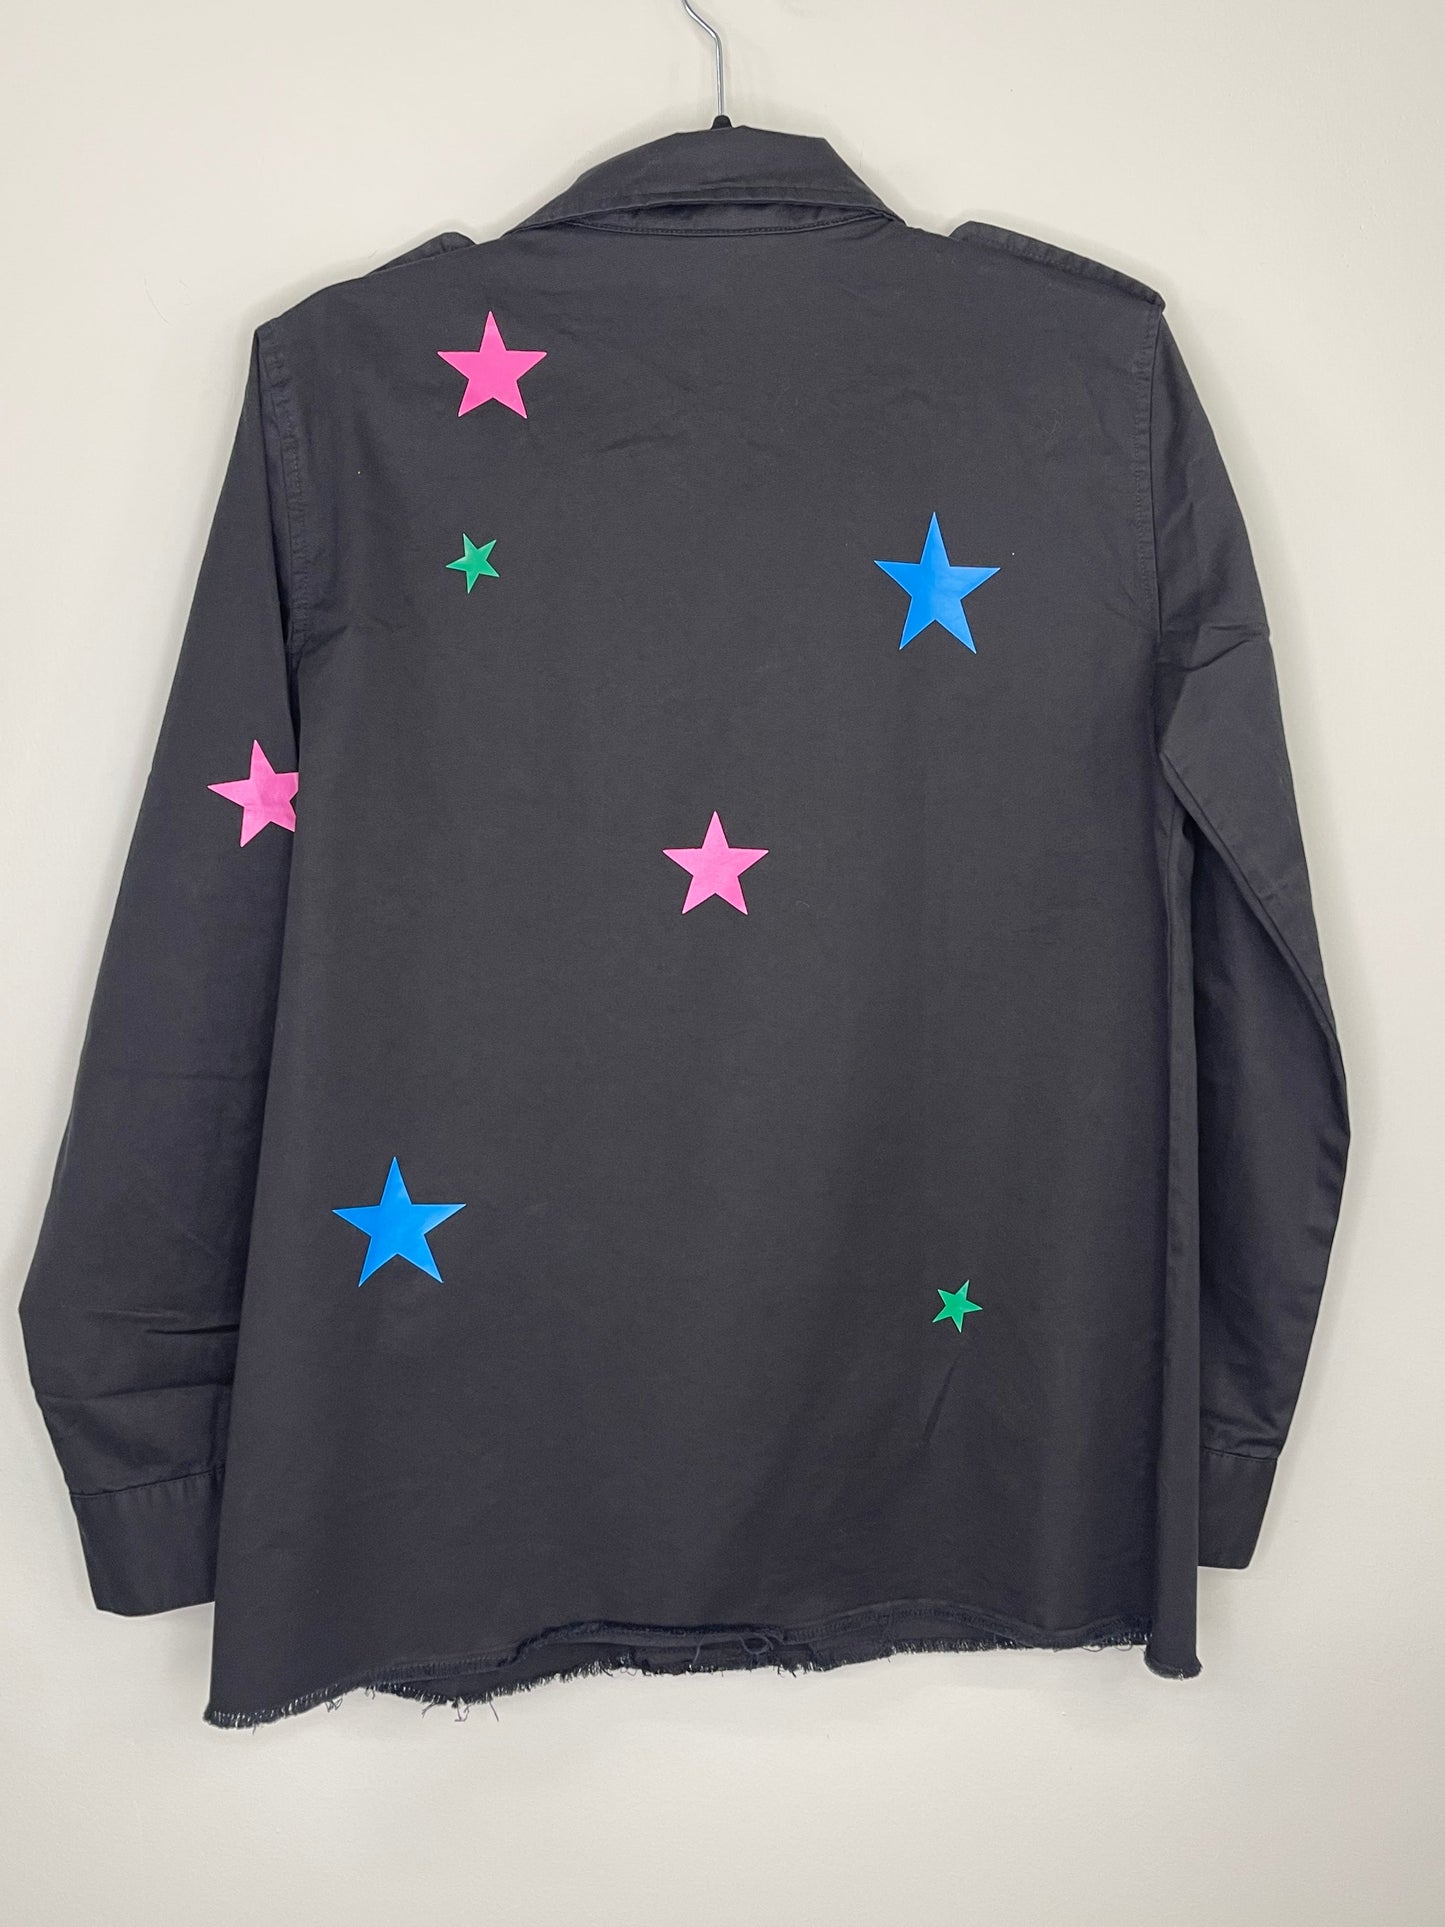 LARGE, or XX-LARGE Shacket, Army Black, Multicolored Stars